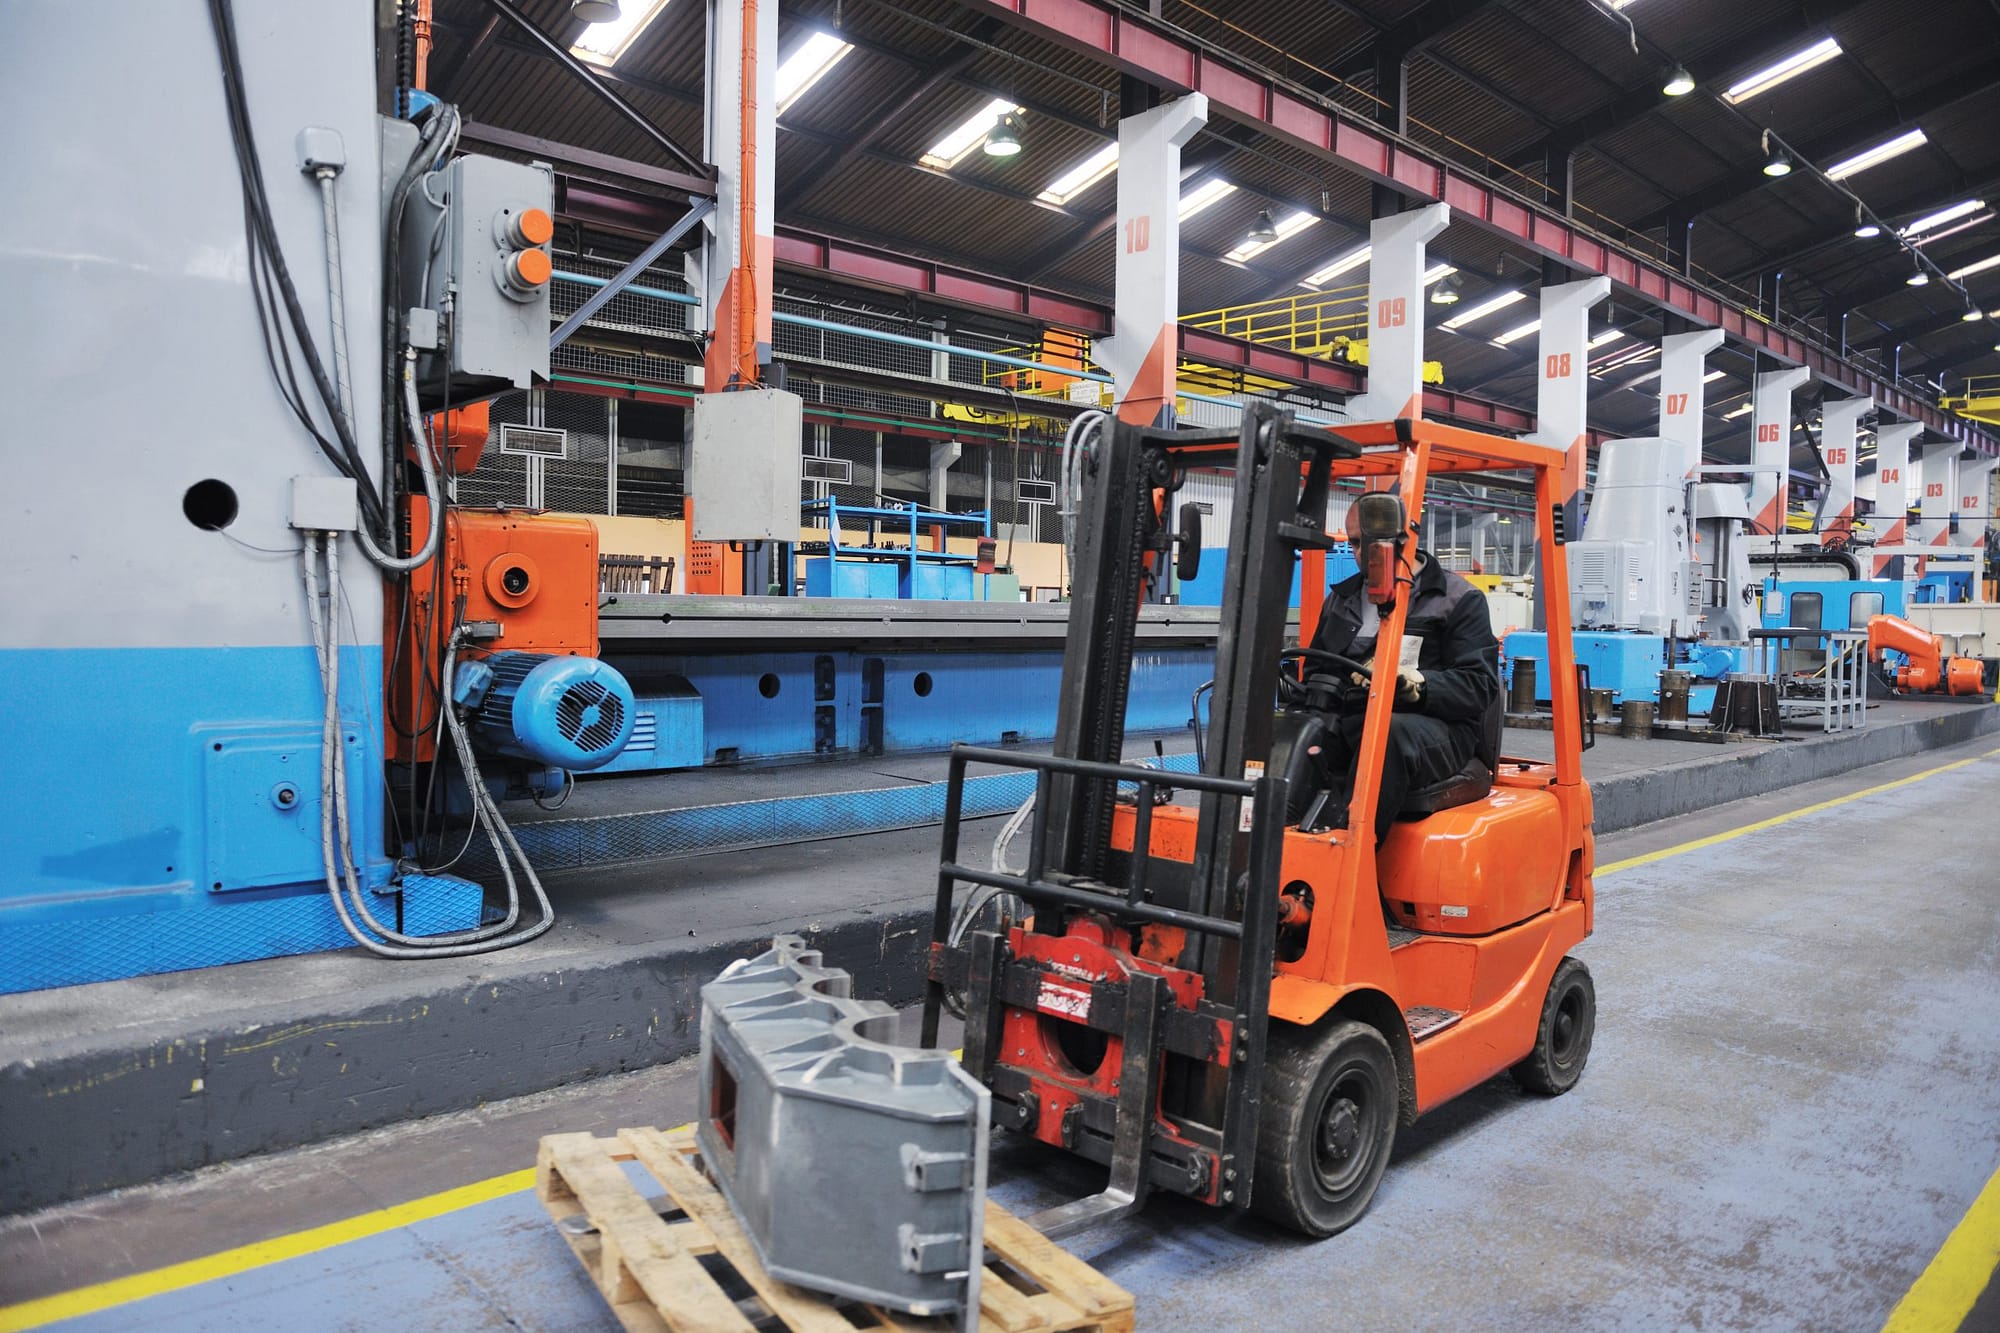 Forklift in factory setting